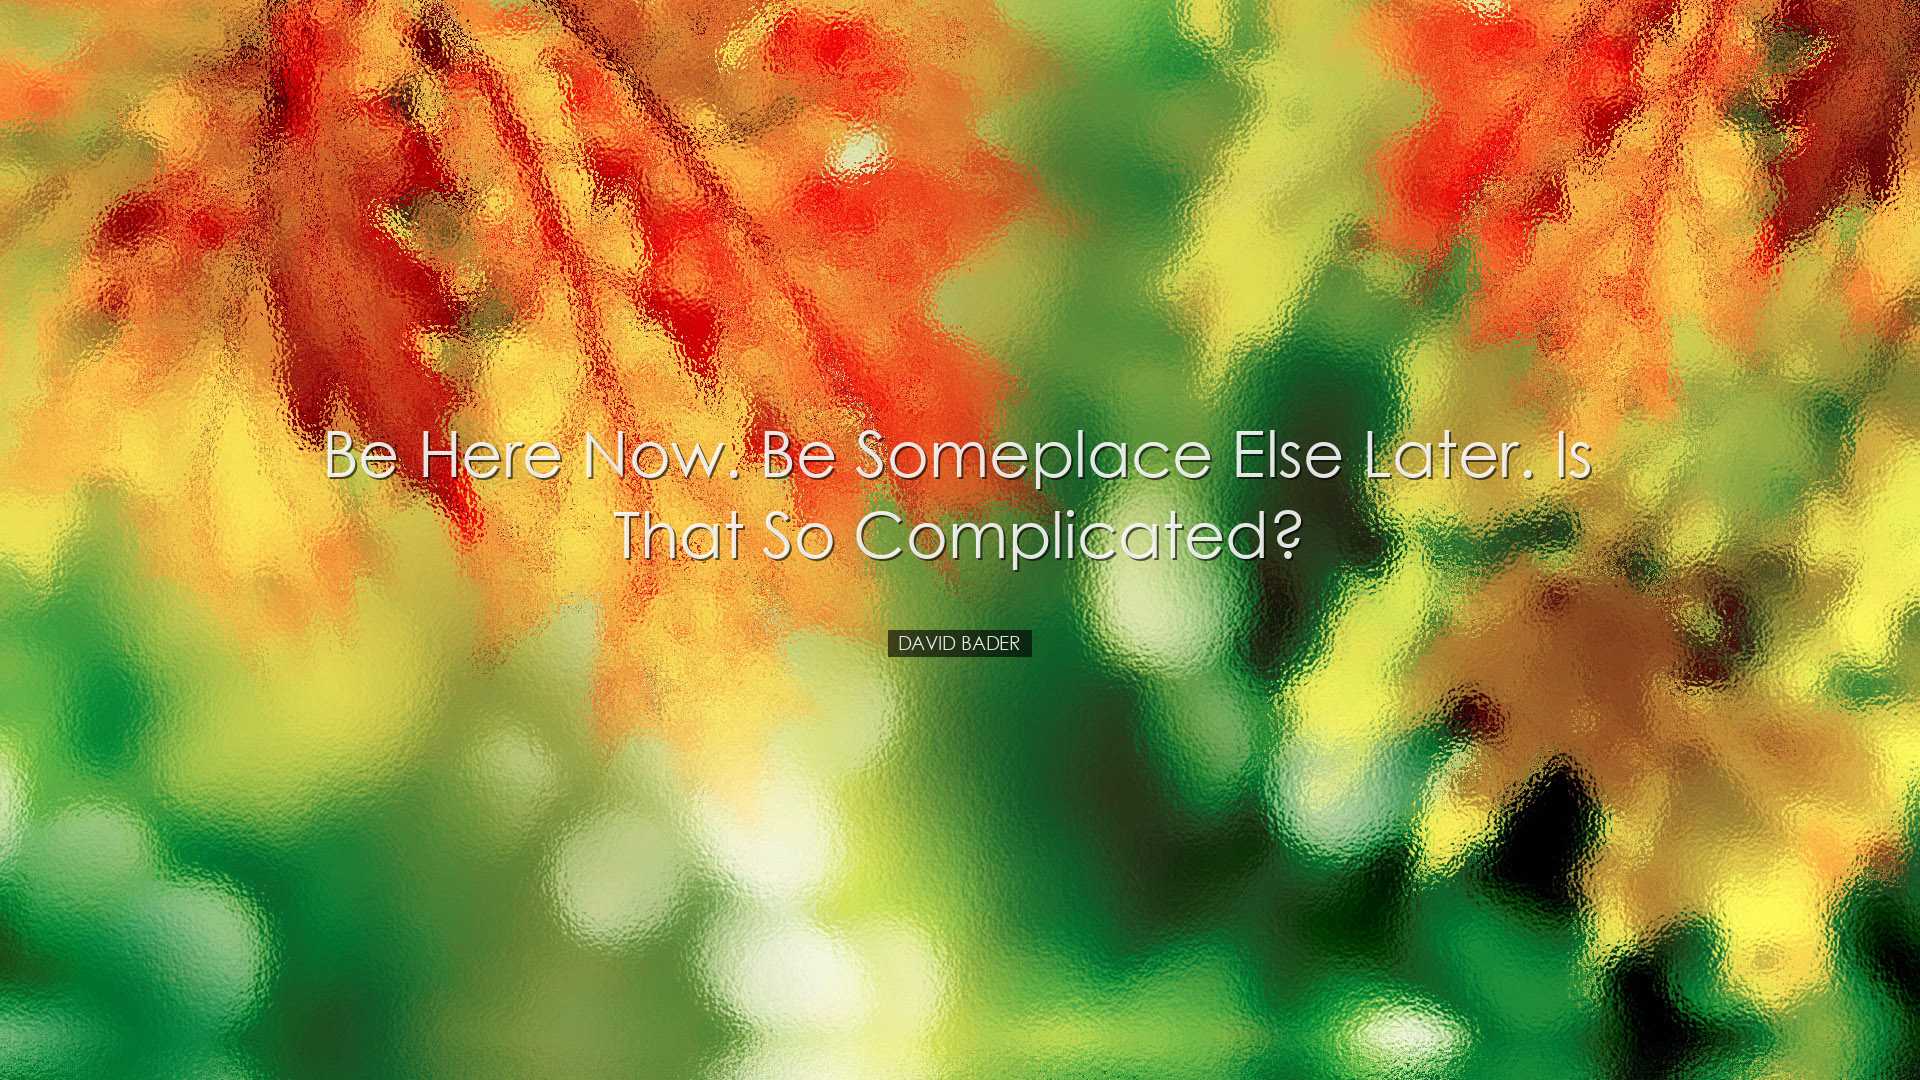 Be here now. Be someplace else later. Is that so complicated? - Da